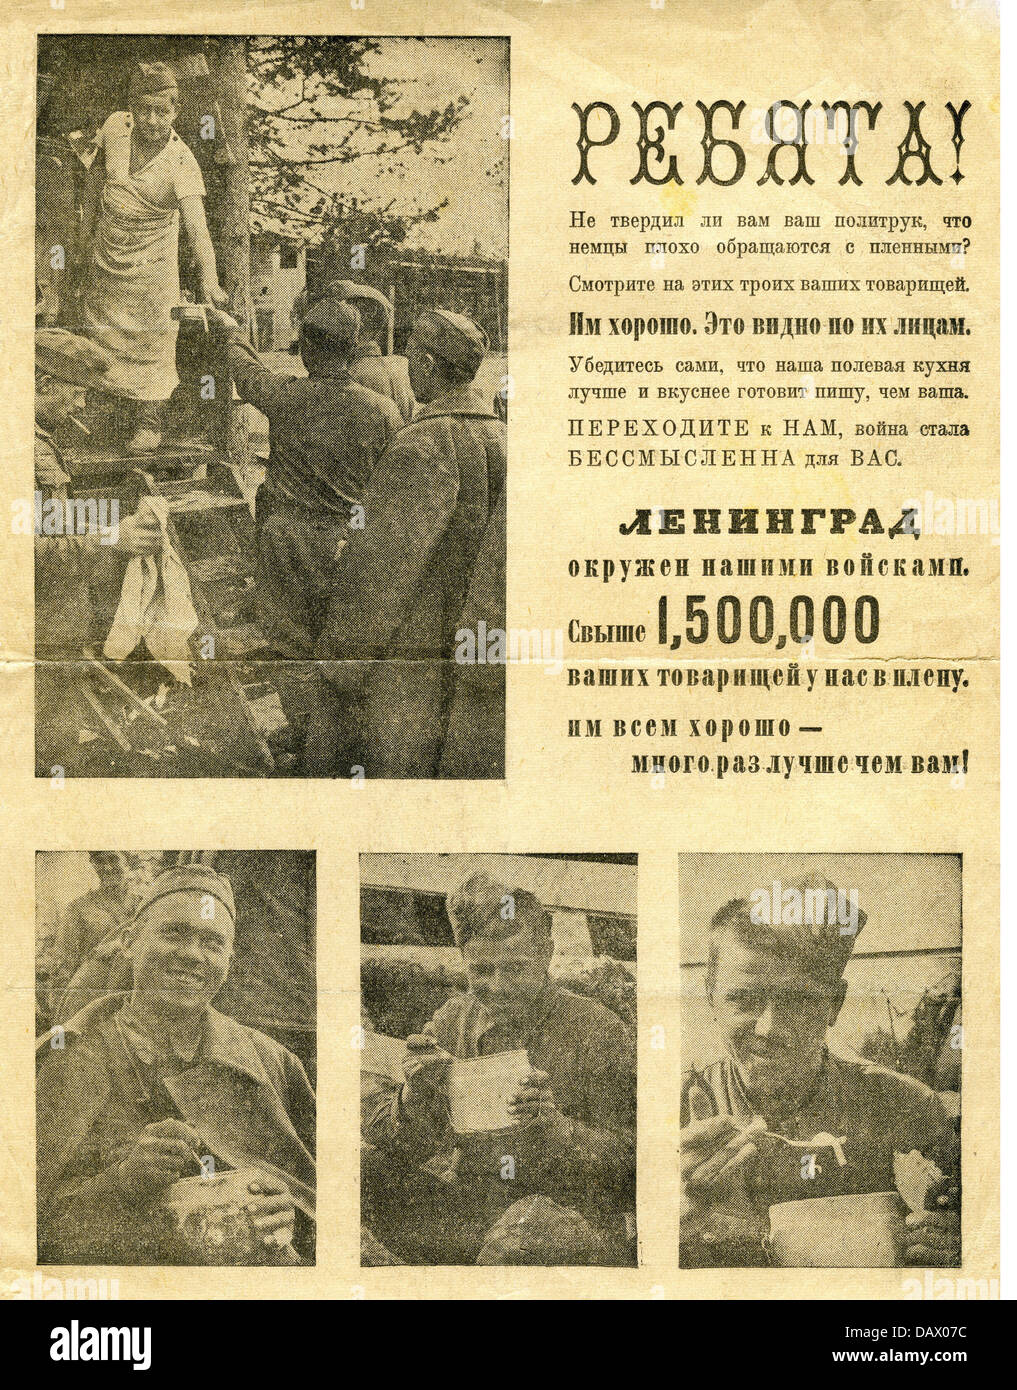 events, Second World War / WWII, propaganda, German flyer, printed to persuade Soviet soldiers in the Leningrad area to desert to the Germans, autumn 1941, Additional-Rights-Clearences-Not Available Stock Photo